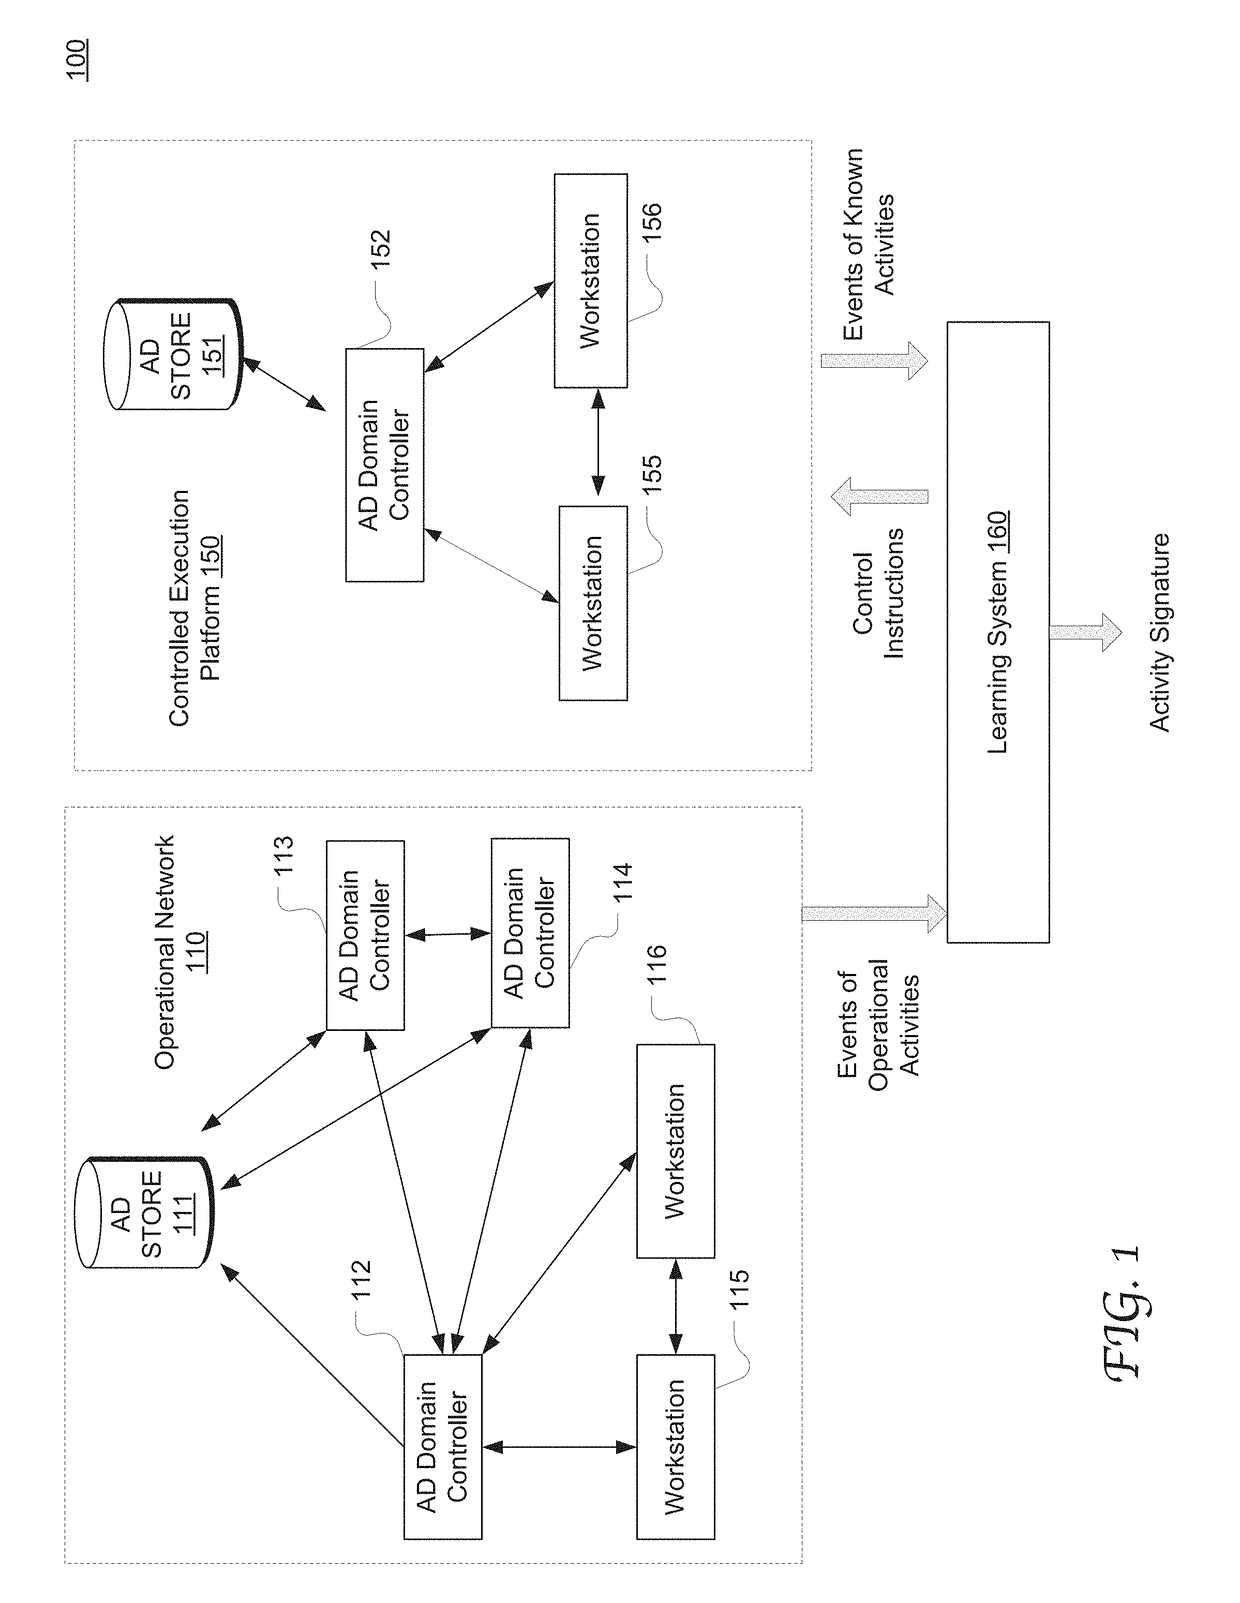 Network activity identification and characterization based on characteristic active directory (AD) event segments